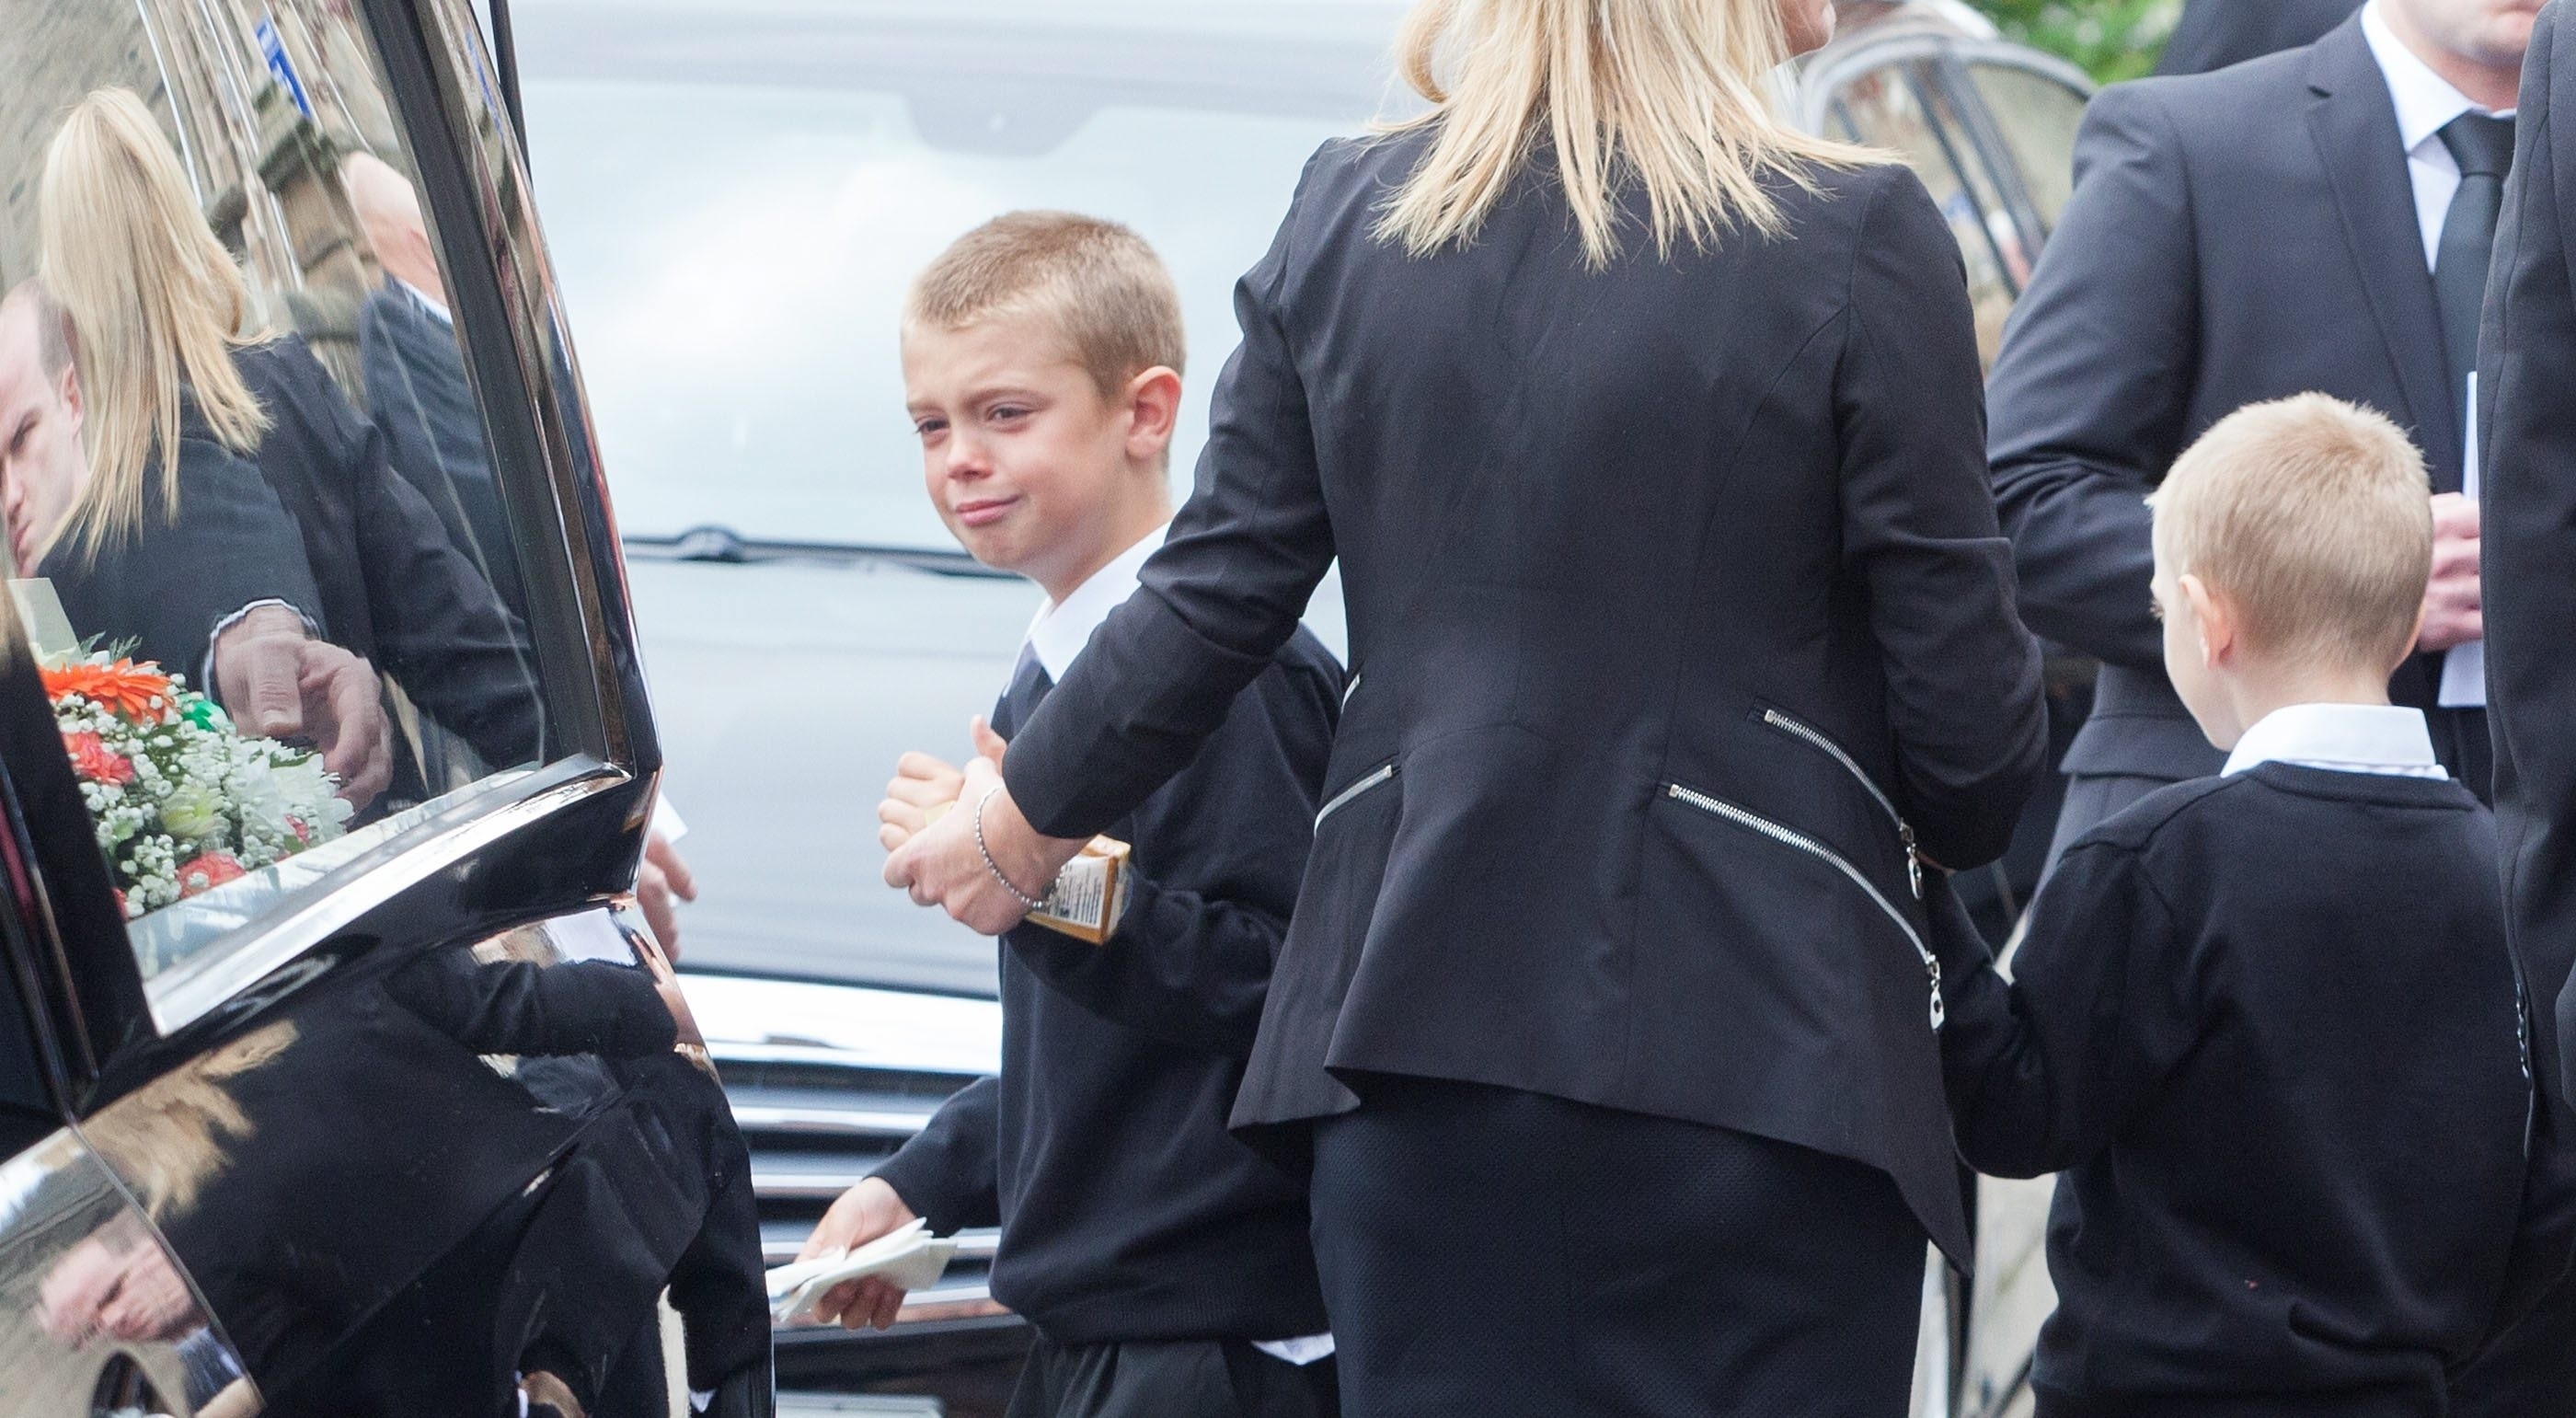 John's son after the funeral of his father. The funeral of John Yuill, 28, who died when his car crashed off the M9 and lay undiscovered for three days. His partner Lamara Bell was in the car and died later in hospital. Takes place at St Francis Xaviers Church in Falkirk. July 30 2015. See Centre Press story CPFUNERAL;